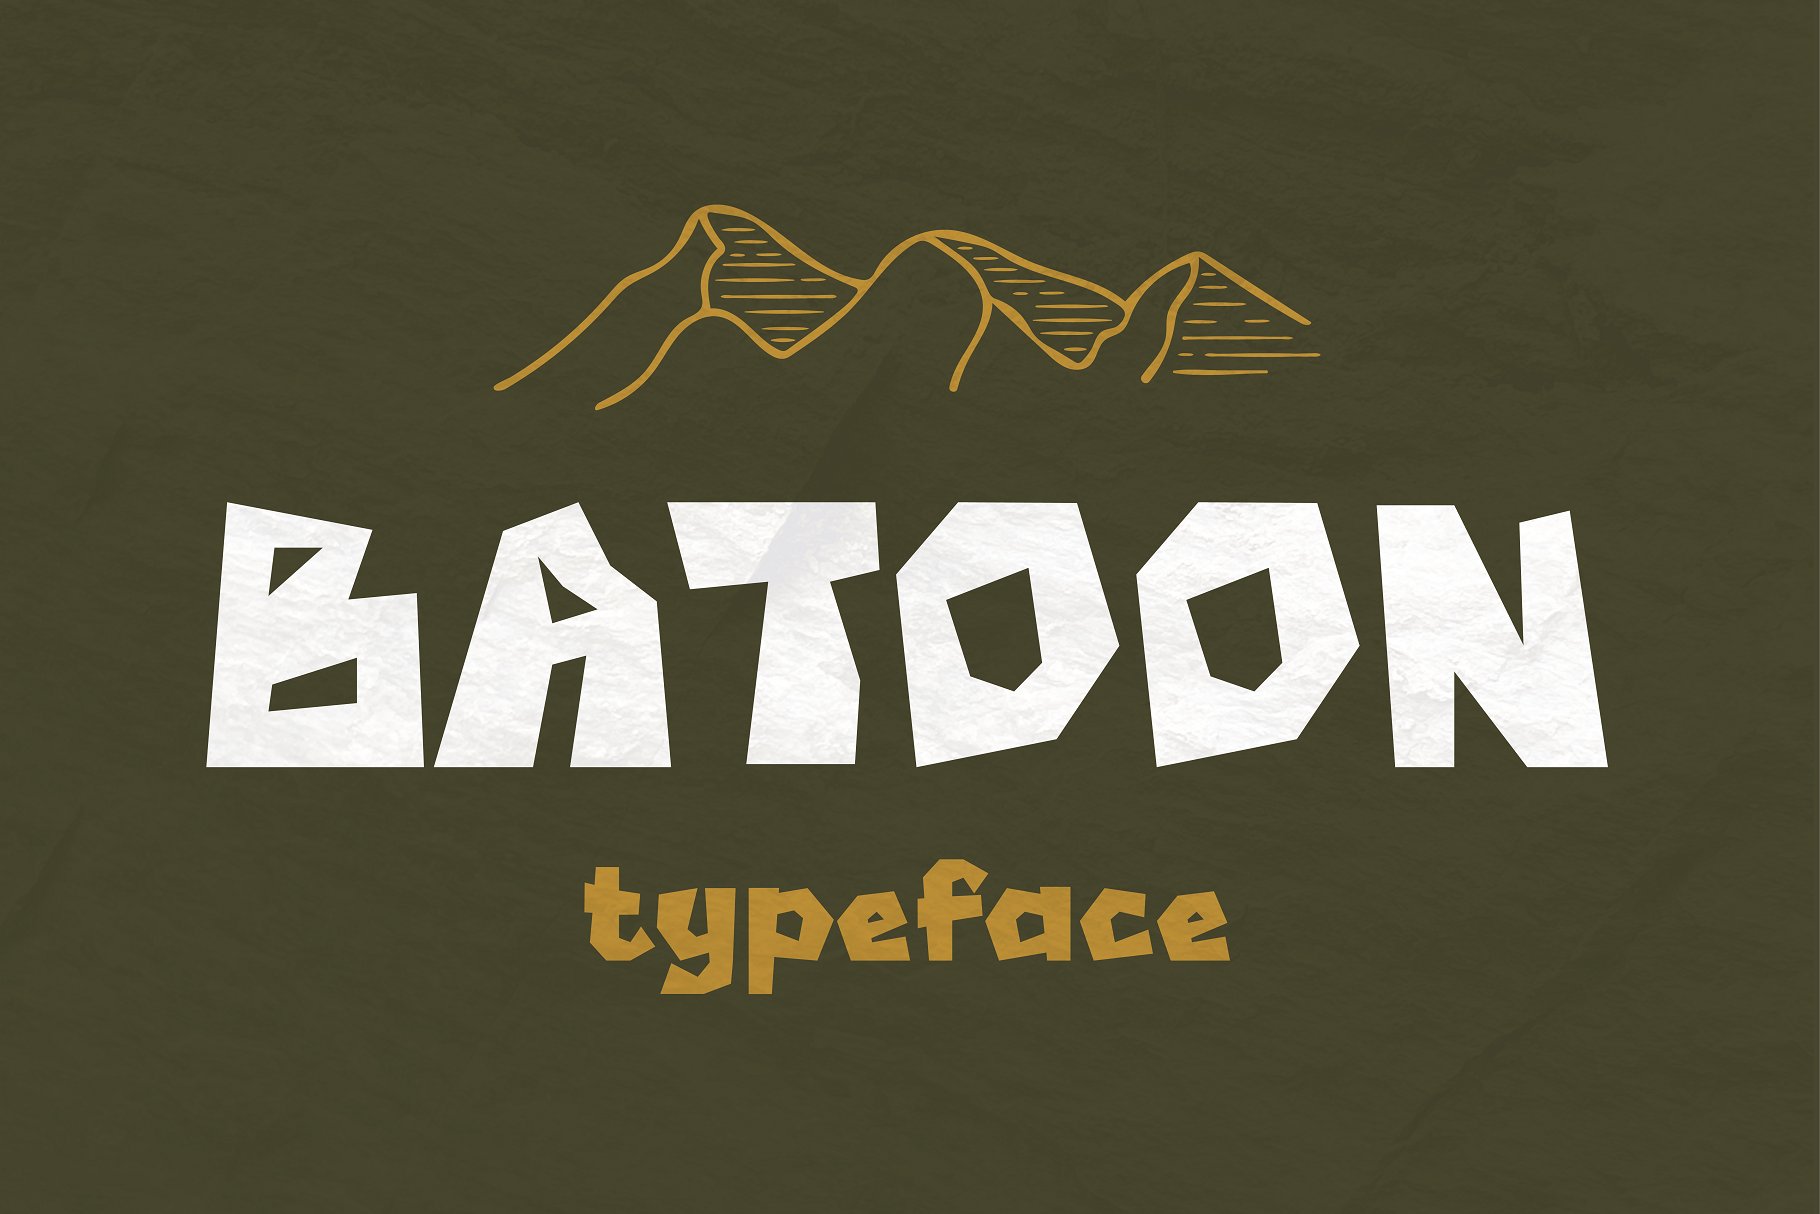 Batoon - Rugged Typeface cover image.